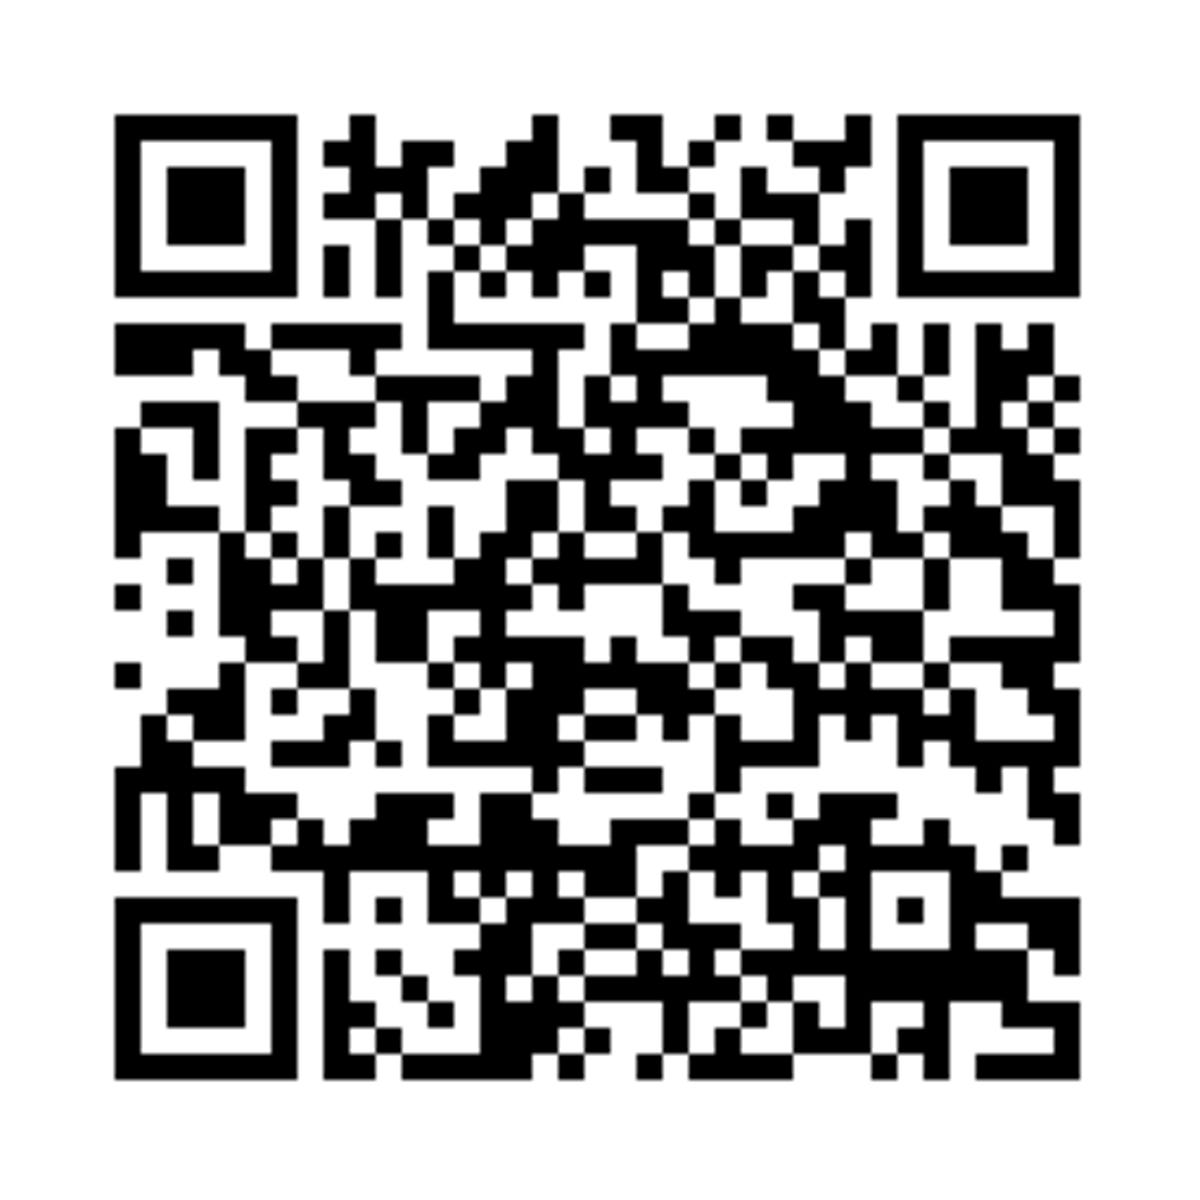 Chrome to Phone for Android QR Code